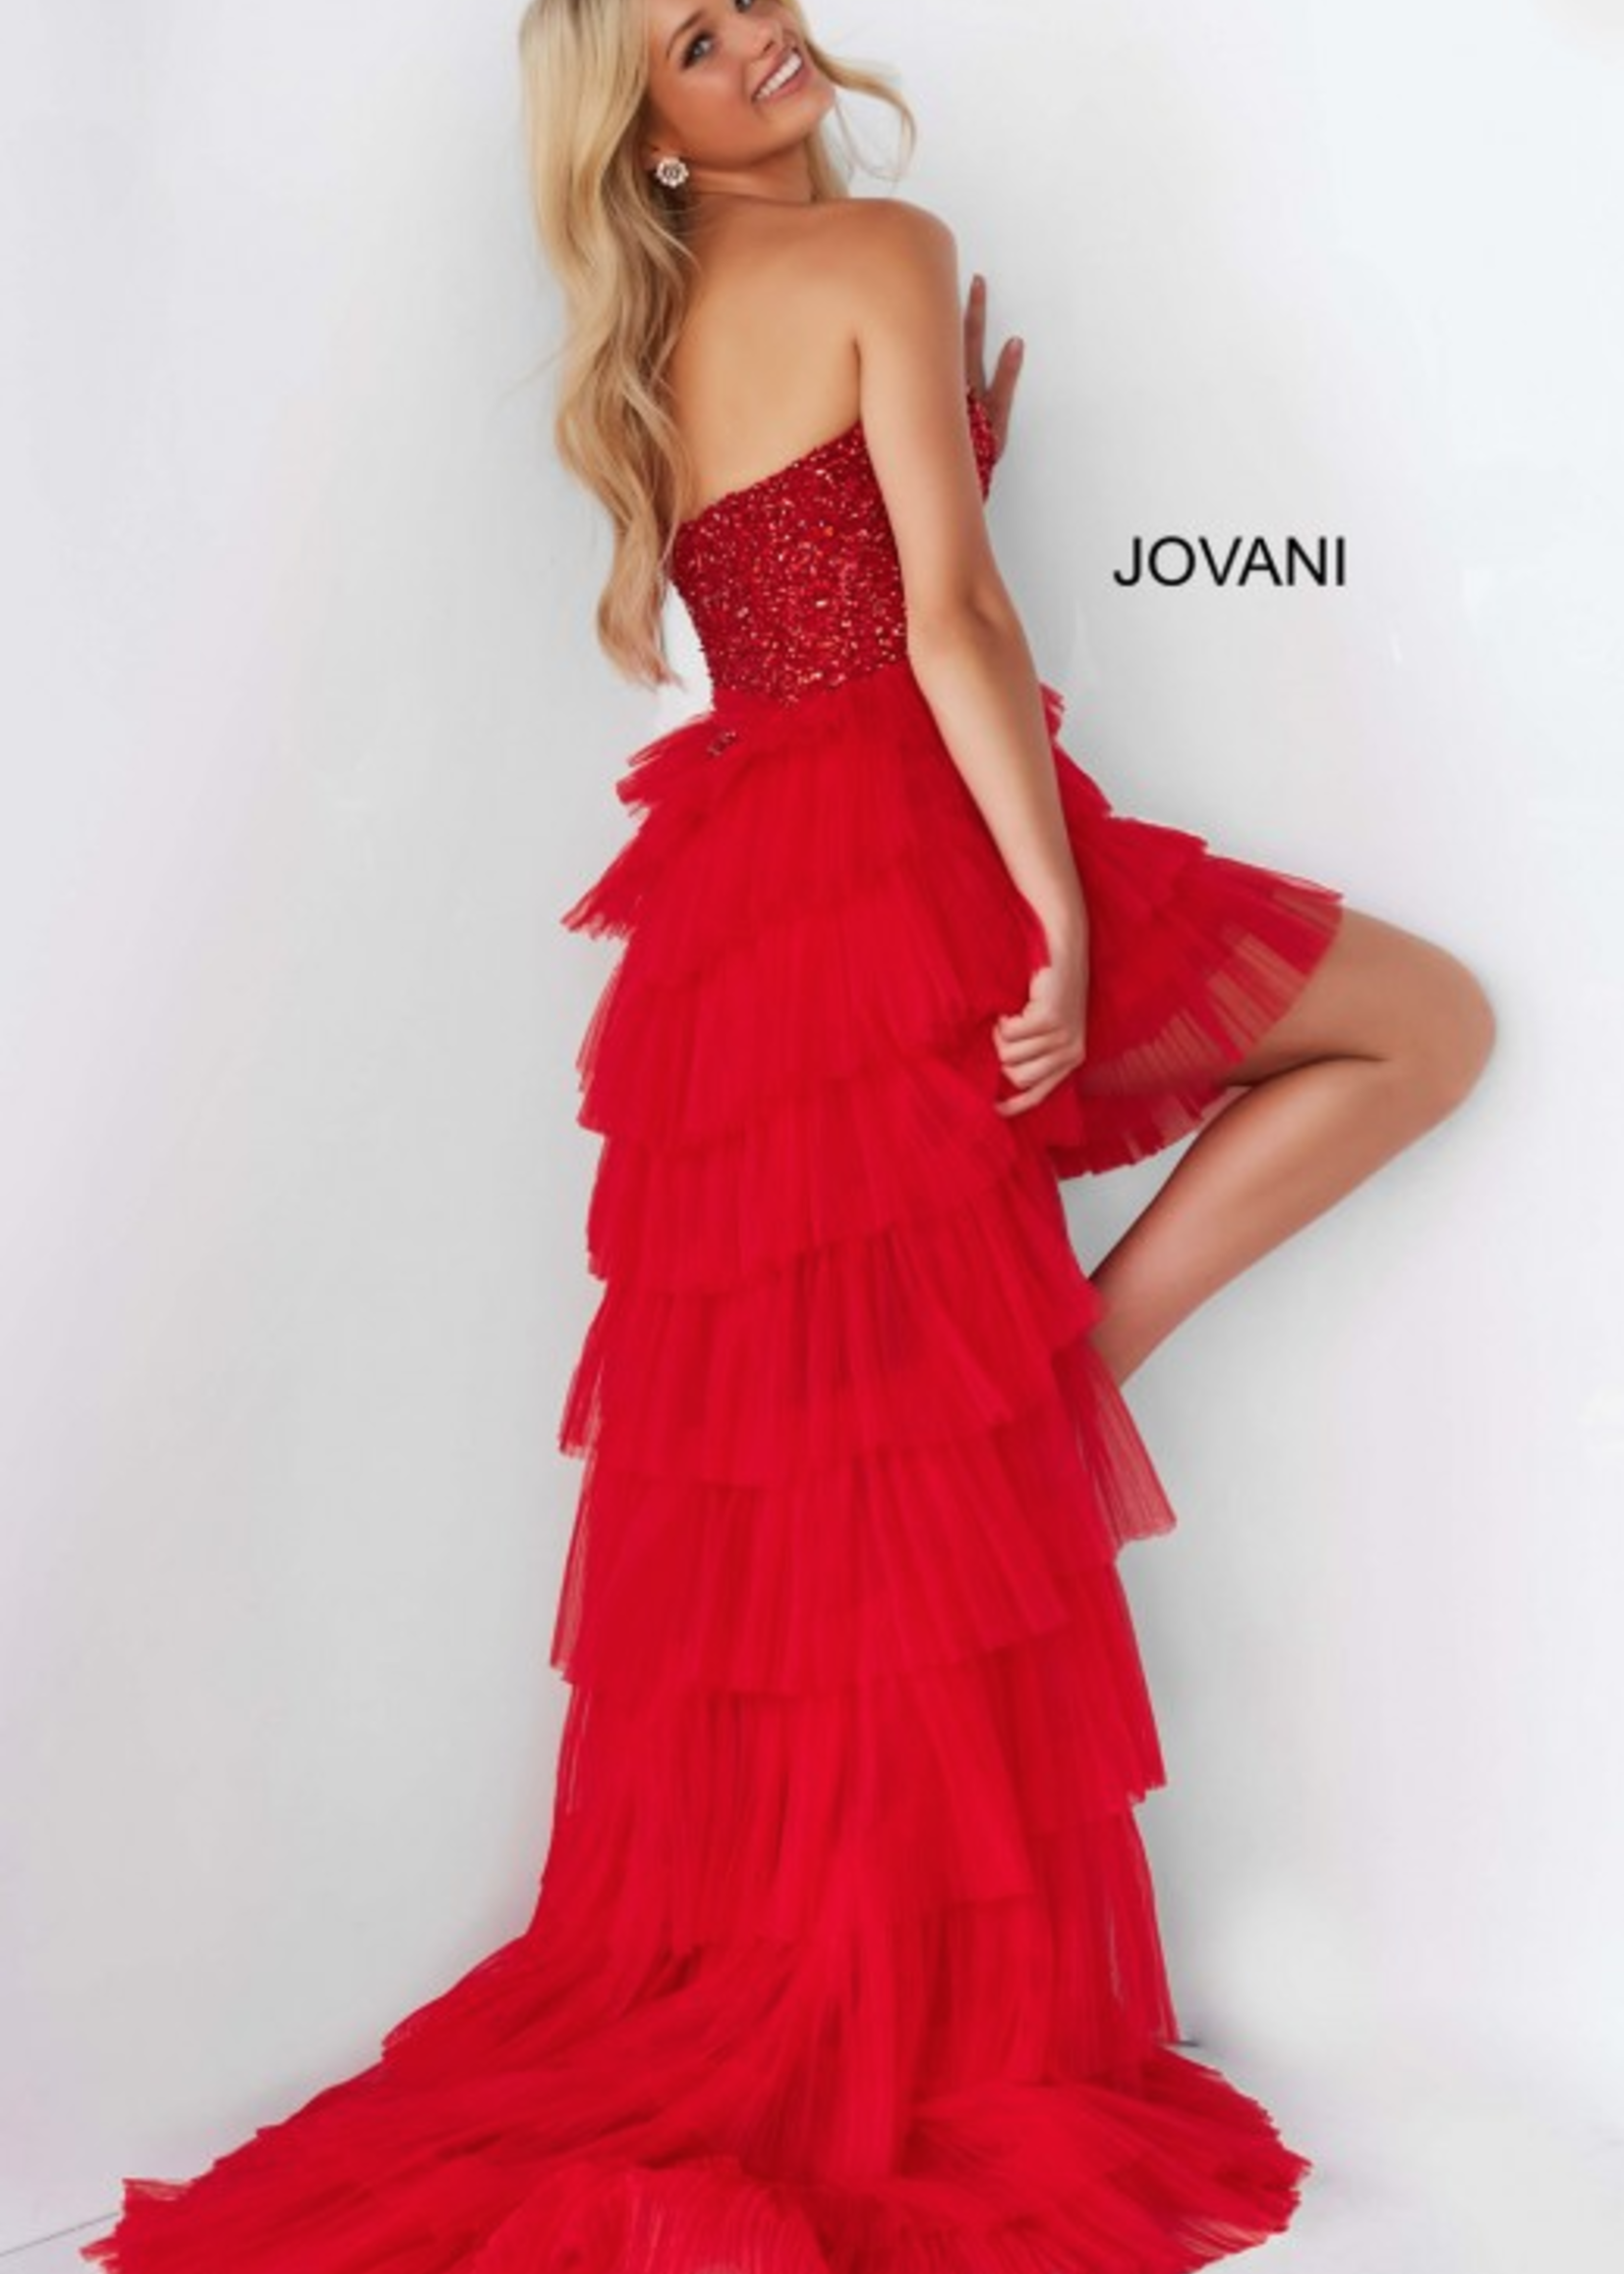 Jovani More to Love Red Formal Dress